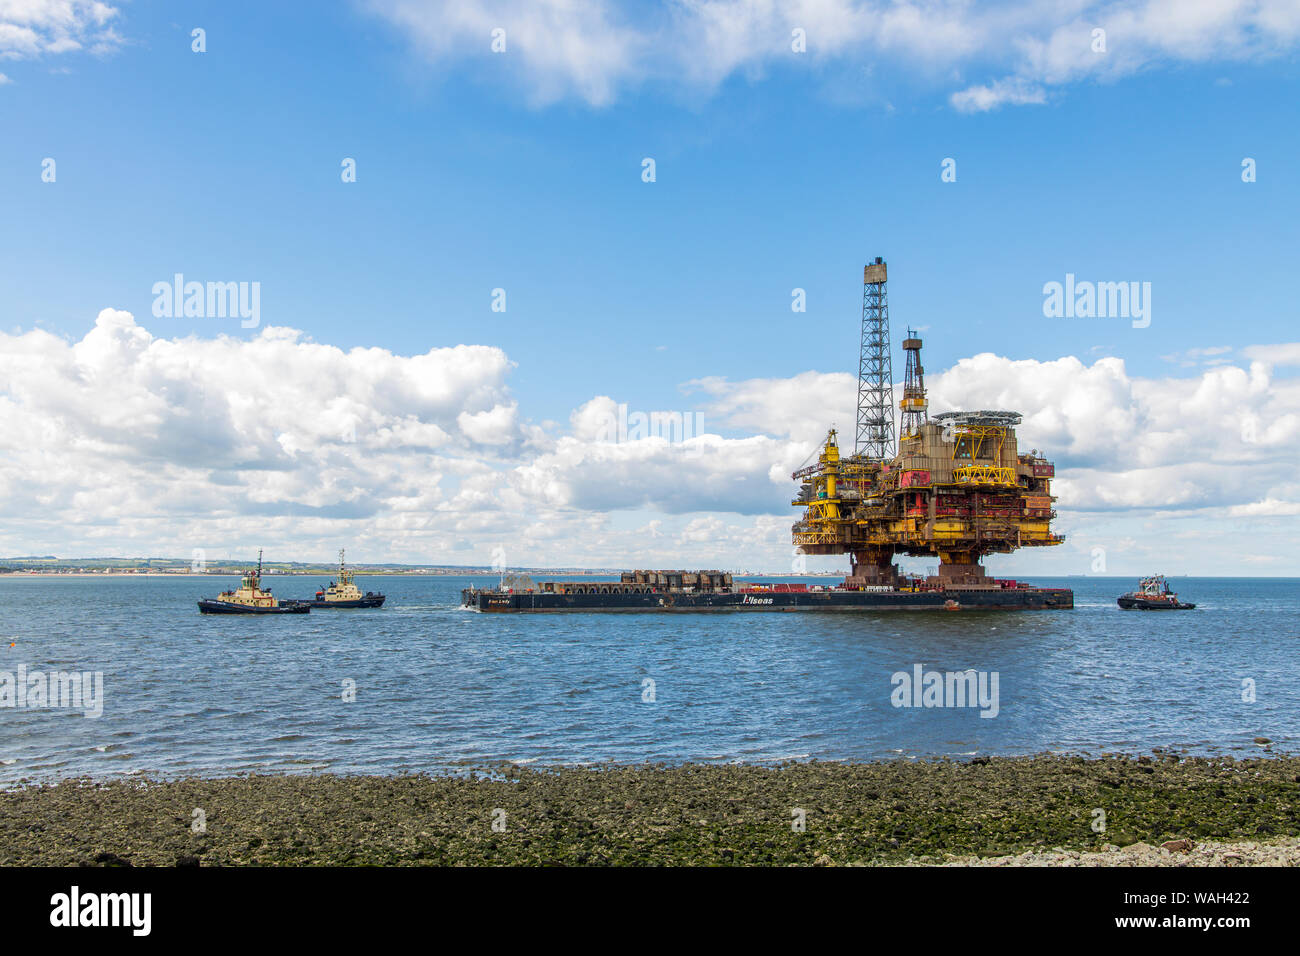 After over 40 years of oil production, the decommissioned Brent Bravo oil rig is towed into the River Tees estuary to be broken up for scrap. Stock Photo